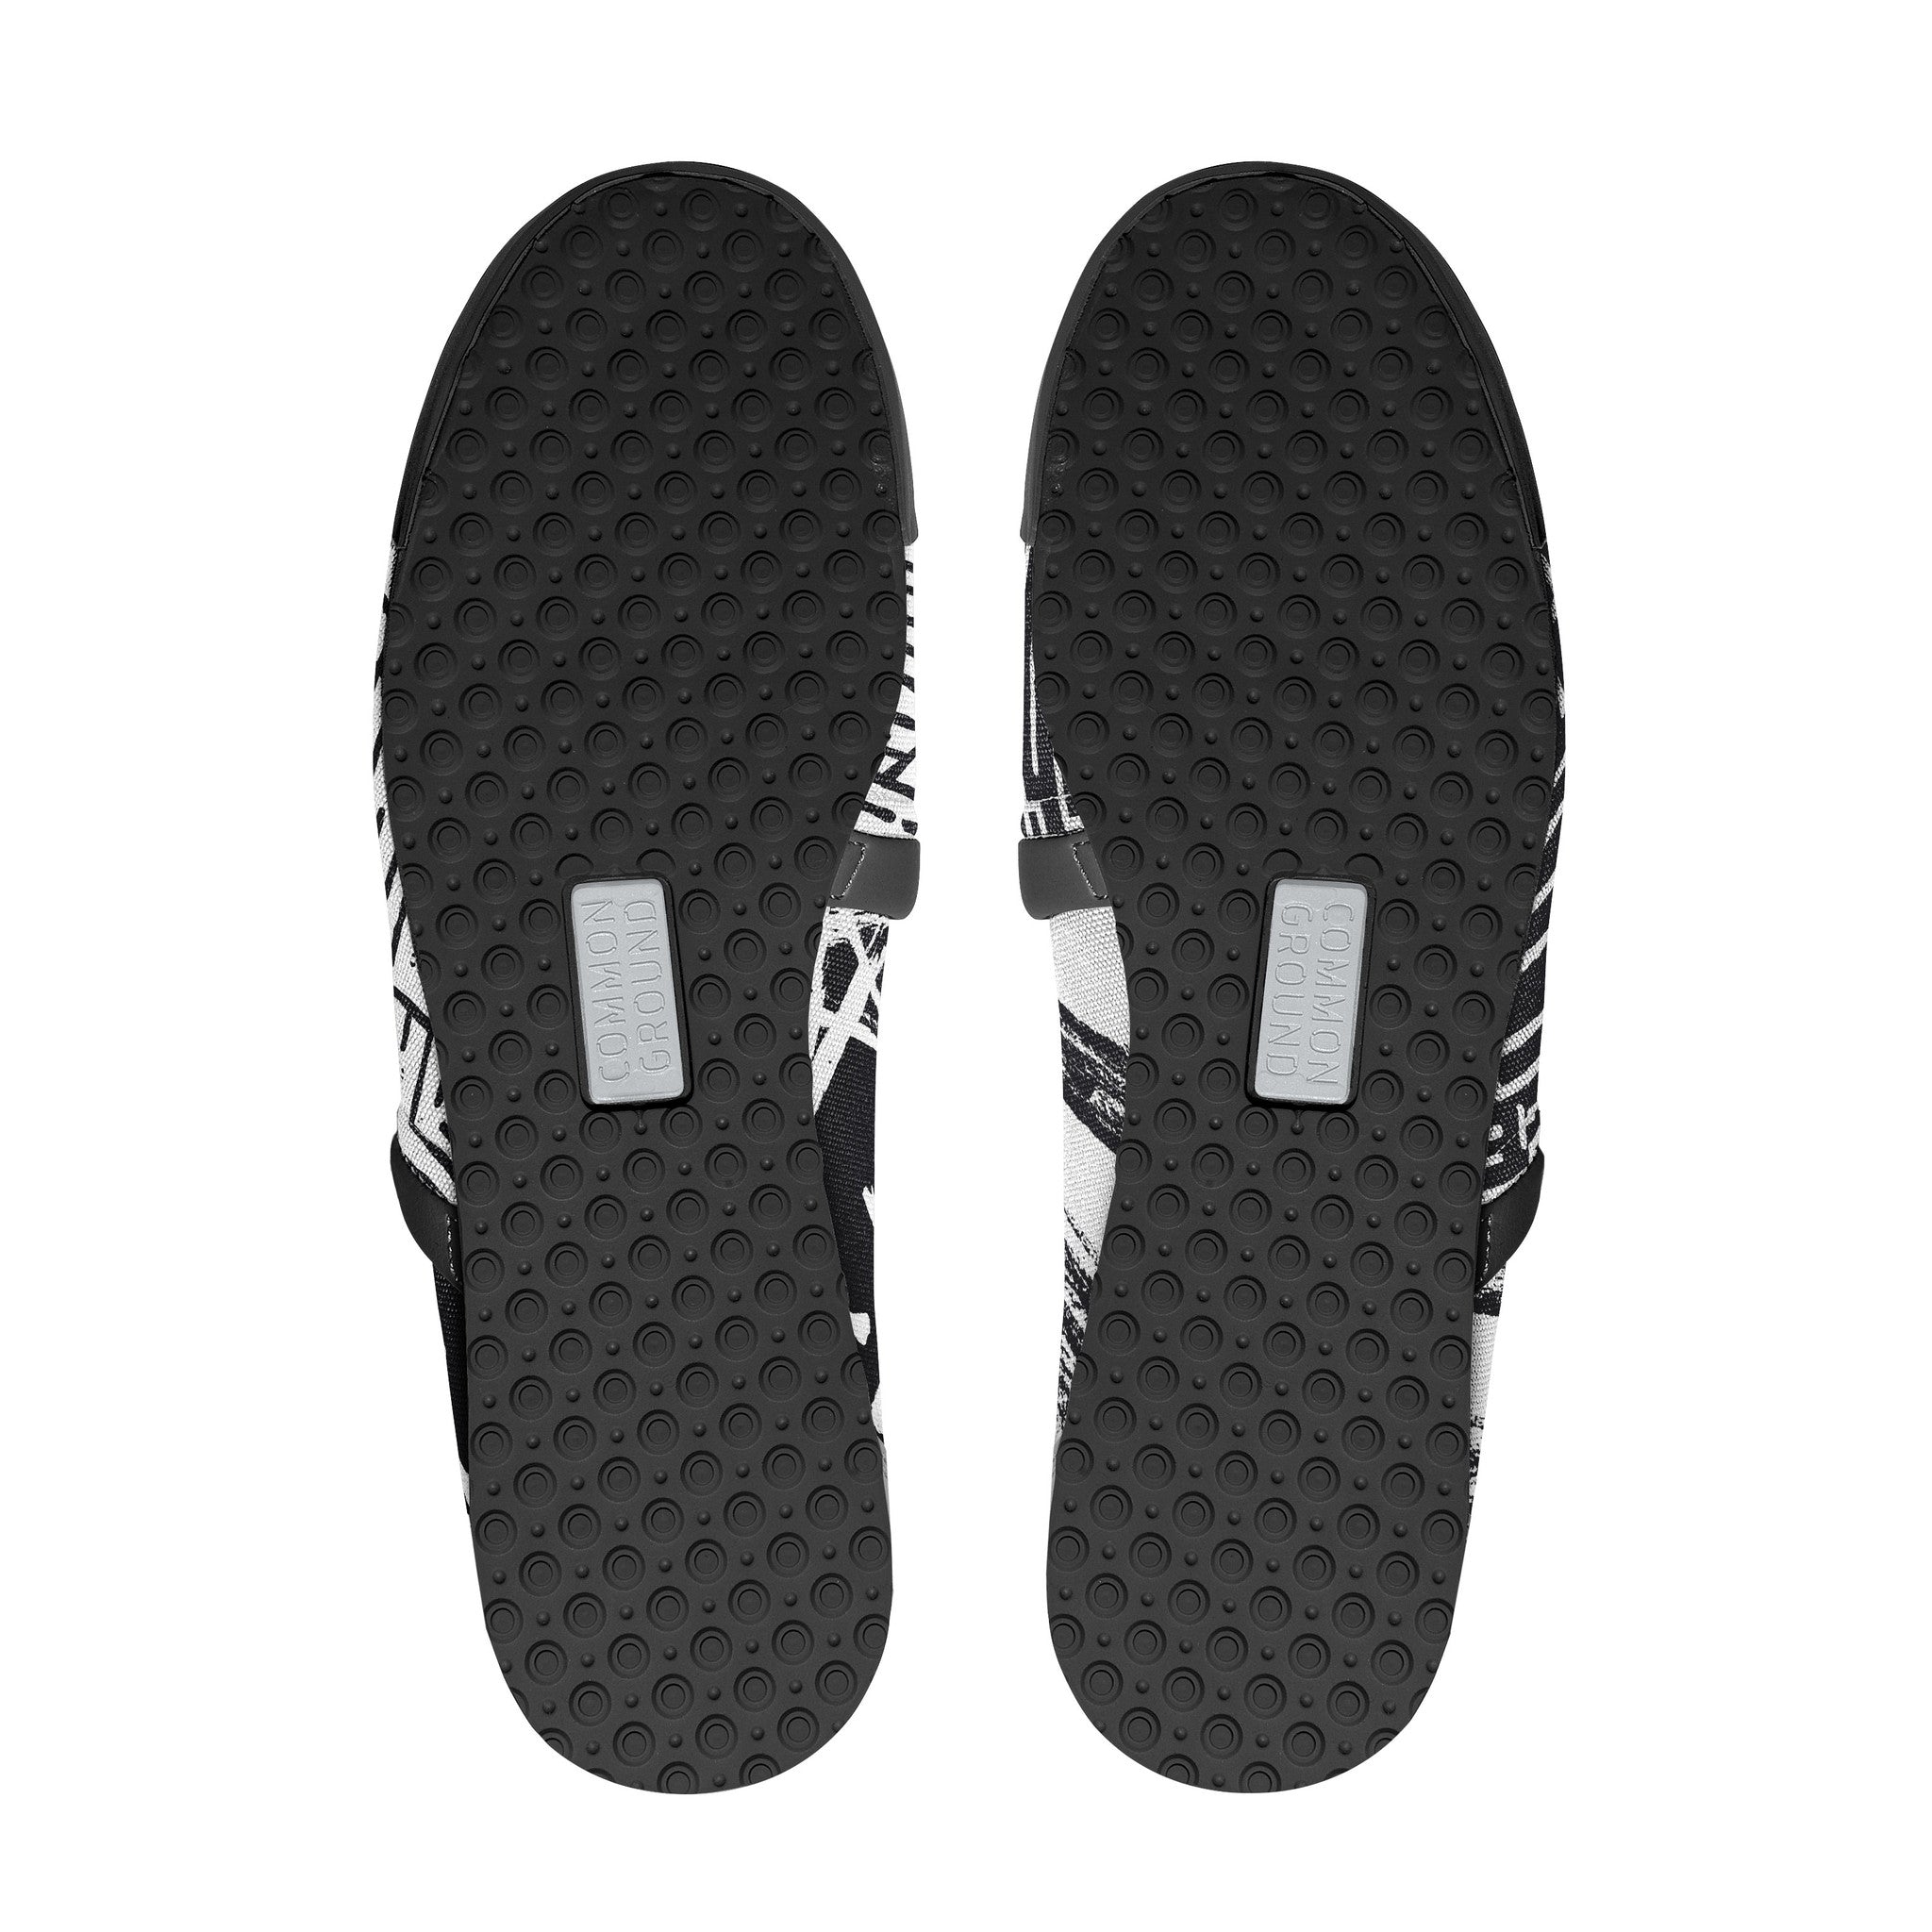 Jet_Black - Common Ground Footwear Shoes Bottom View